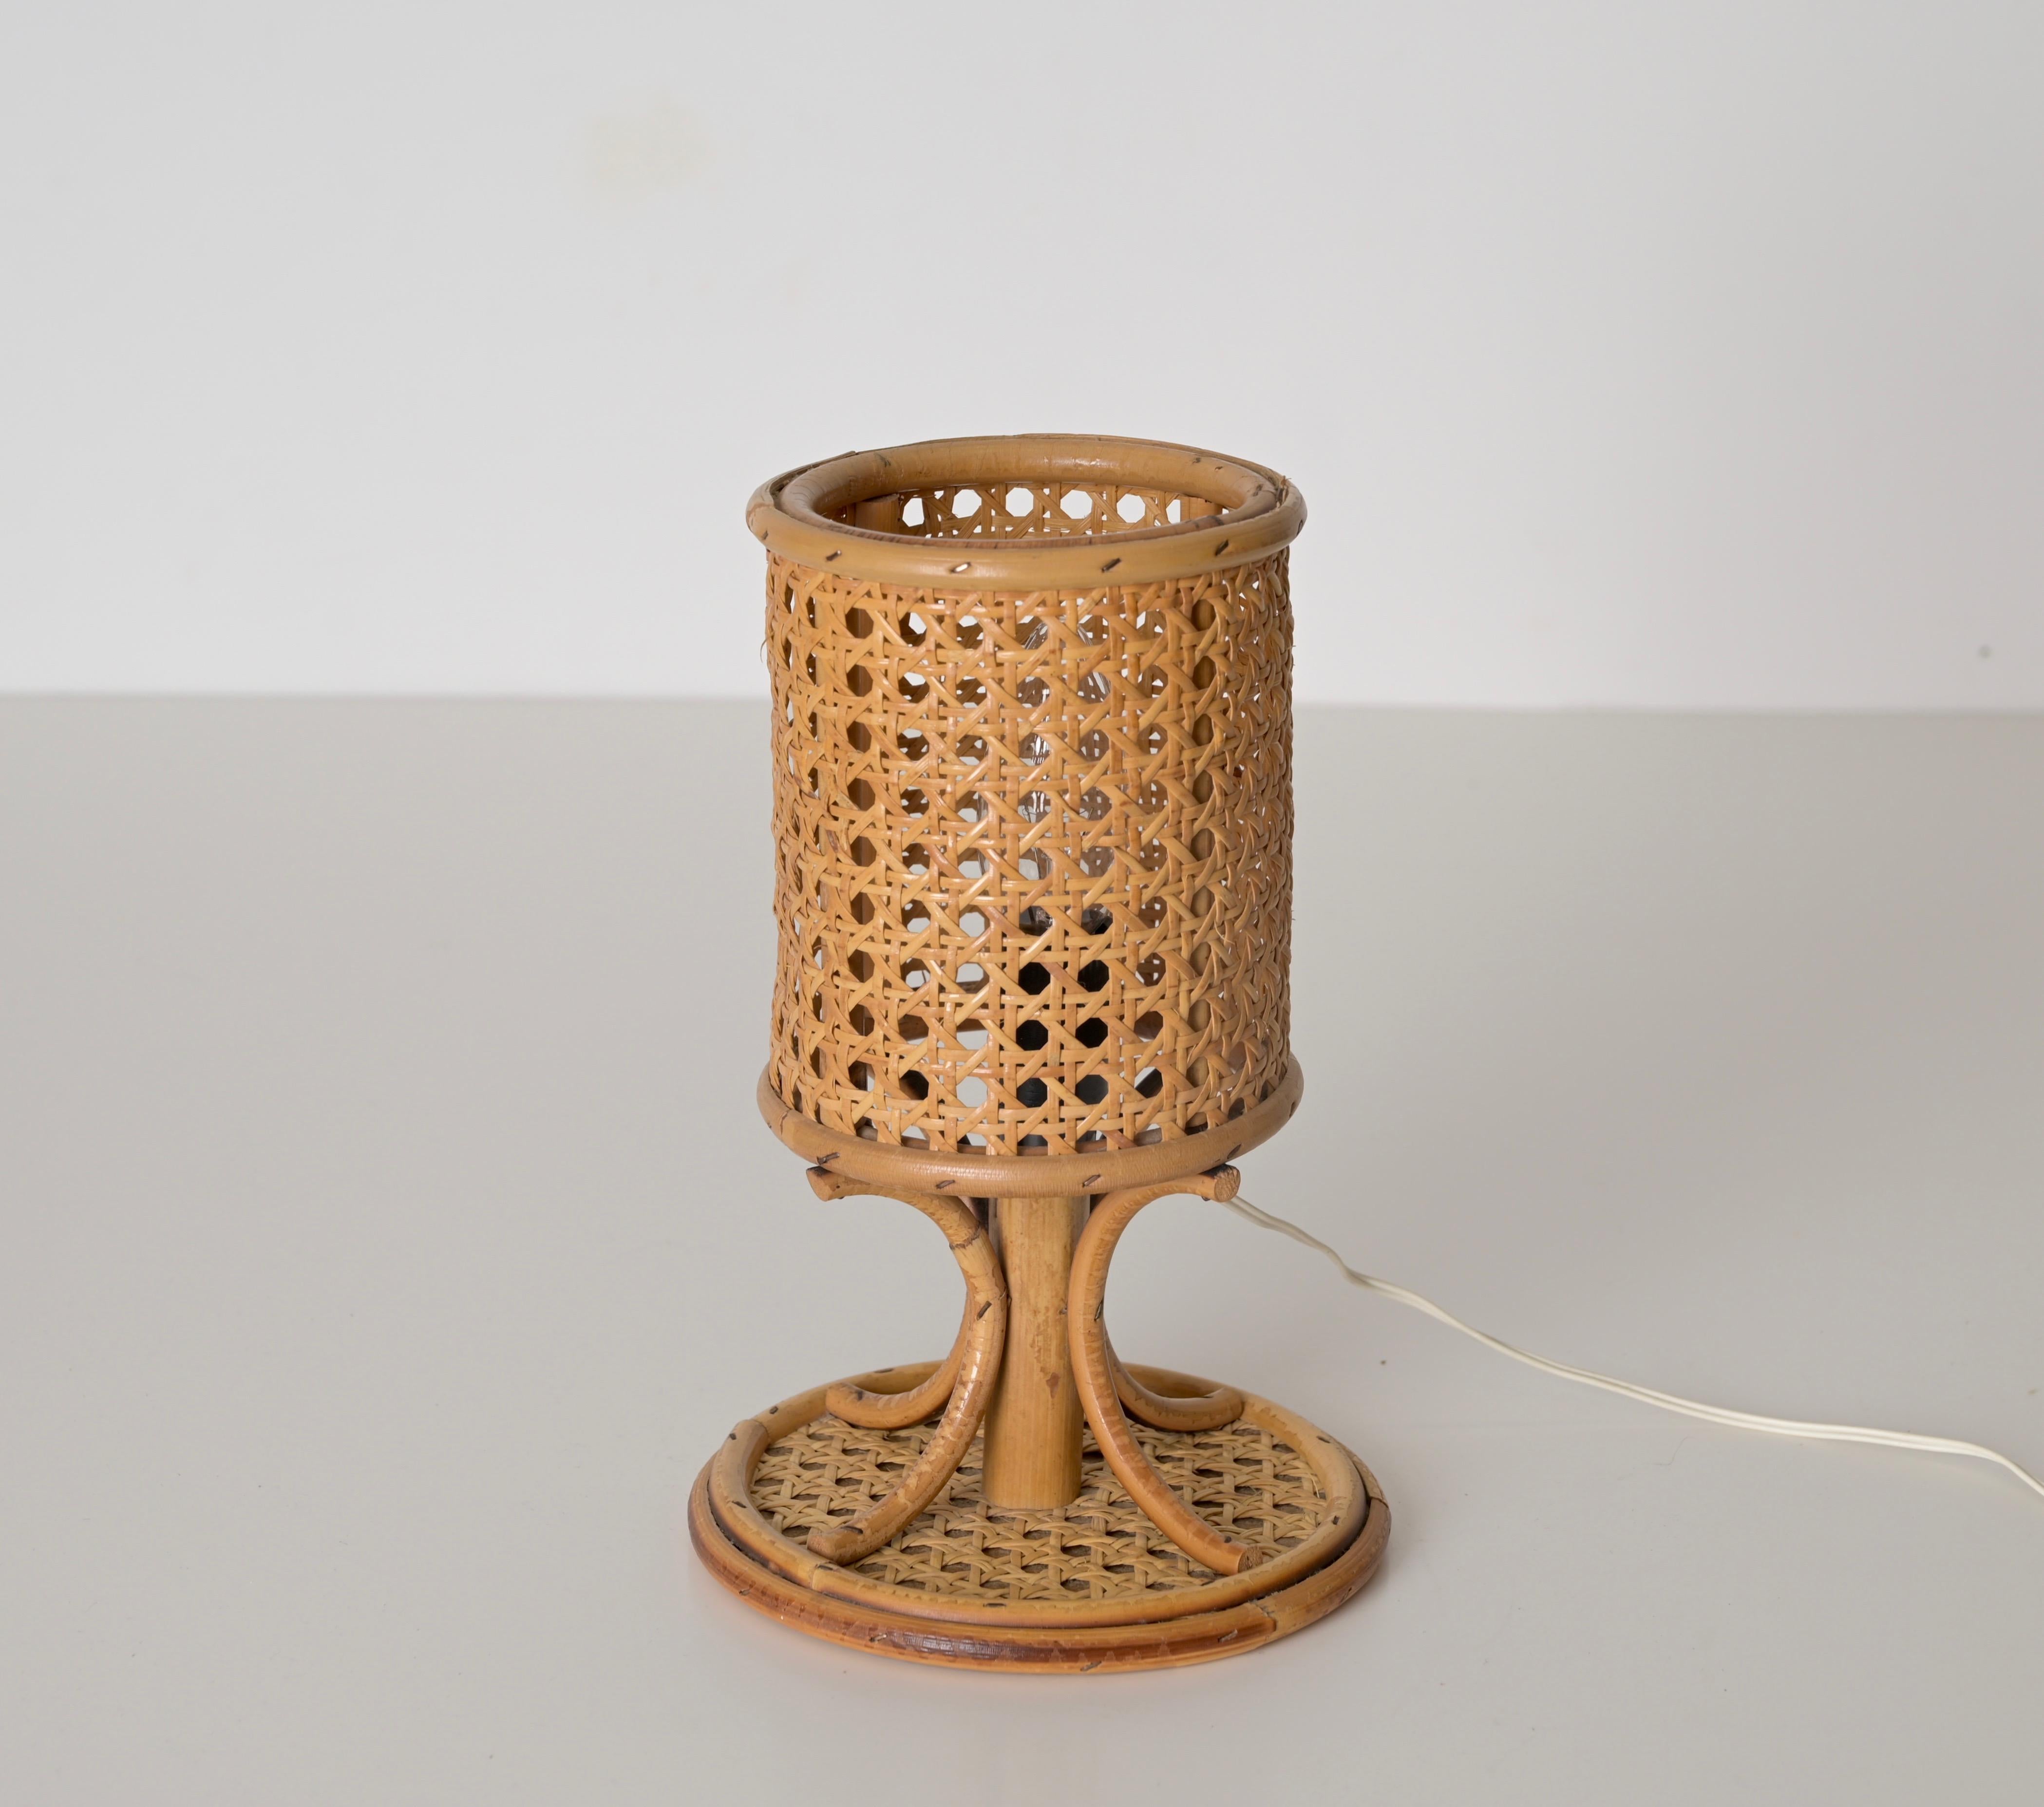 Hand-Crafted Louis Sognot Pair of Table Lamps in Rattan and Wicker, France 1960s For Sale